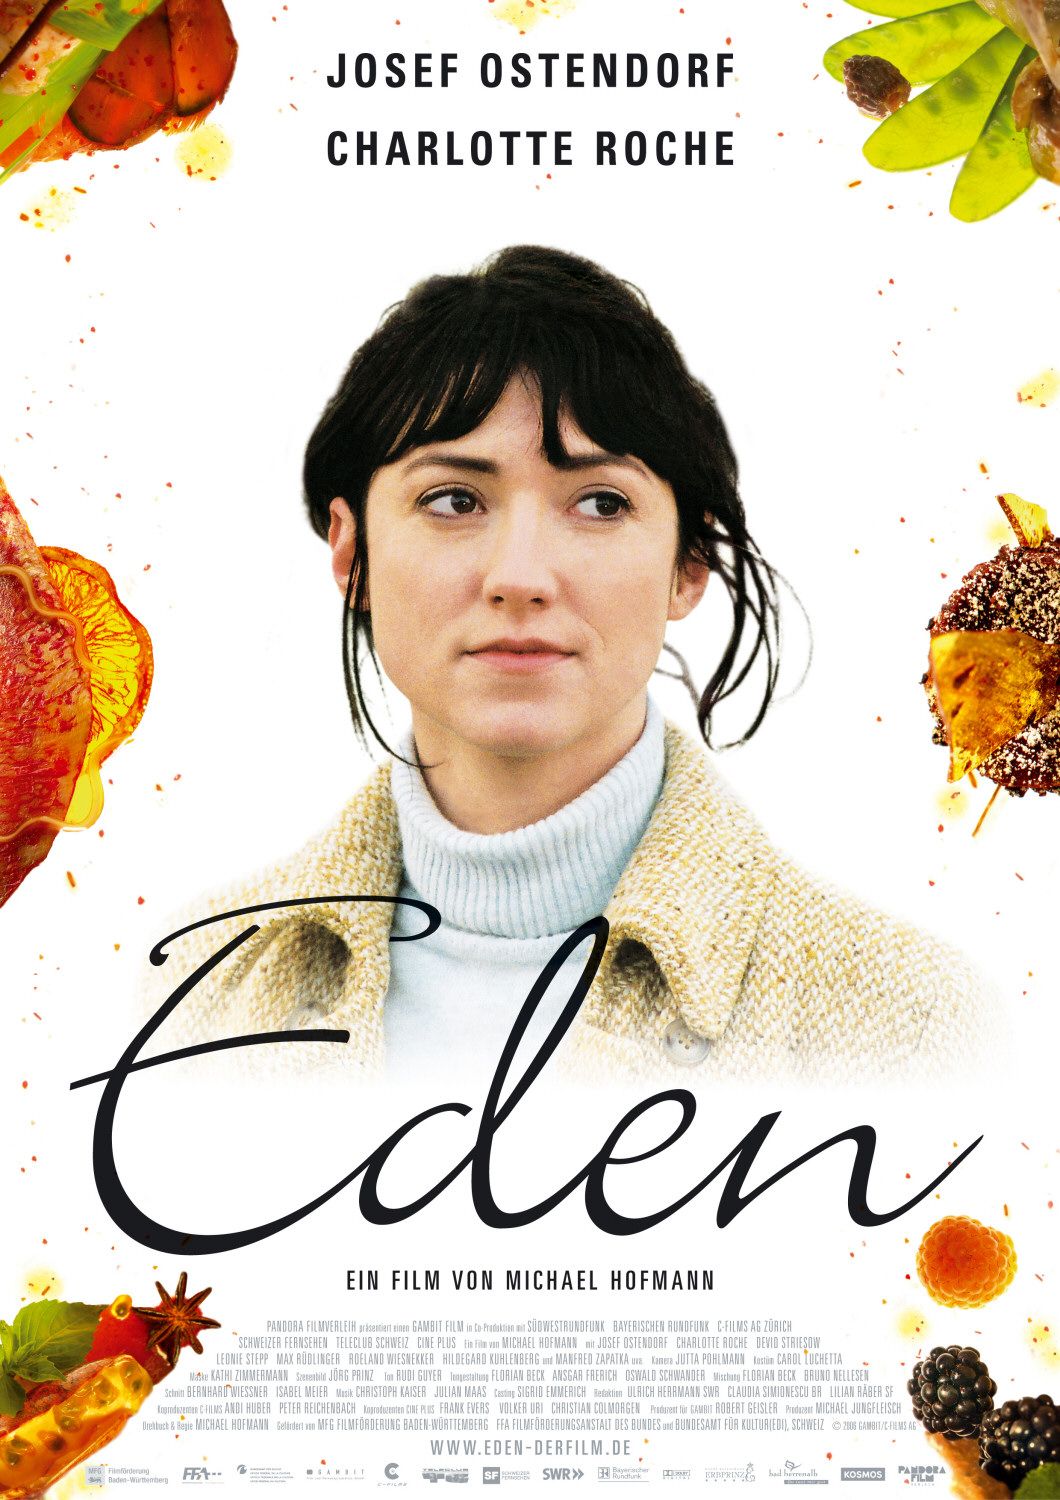 Extra Large Movie Poster Image for Eden 